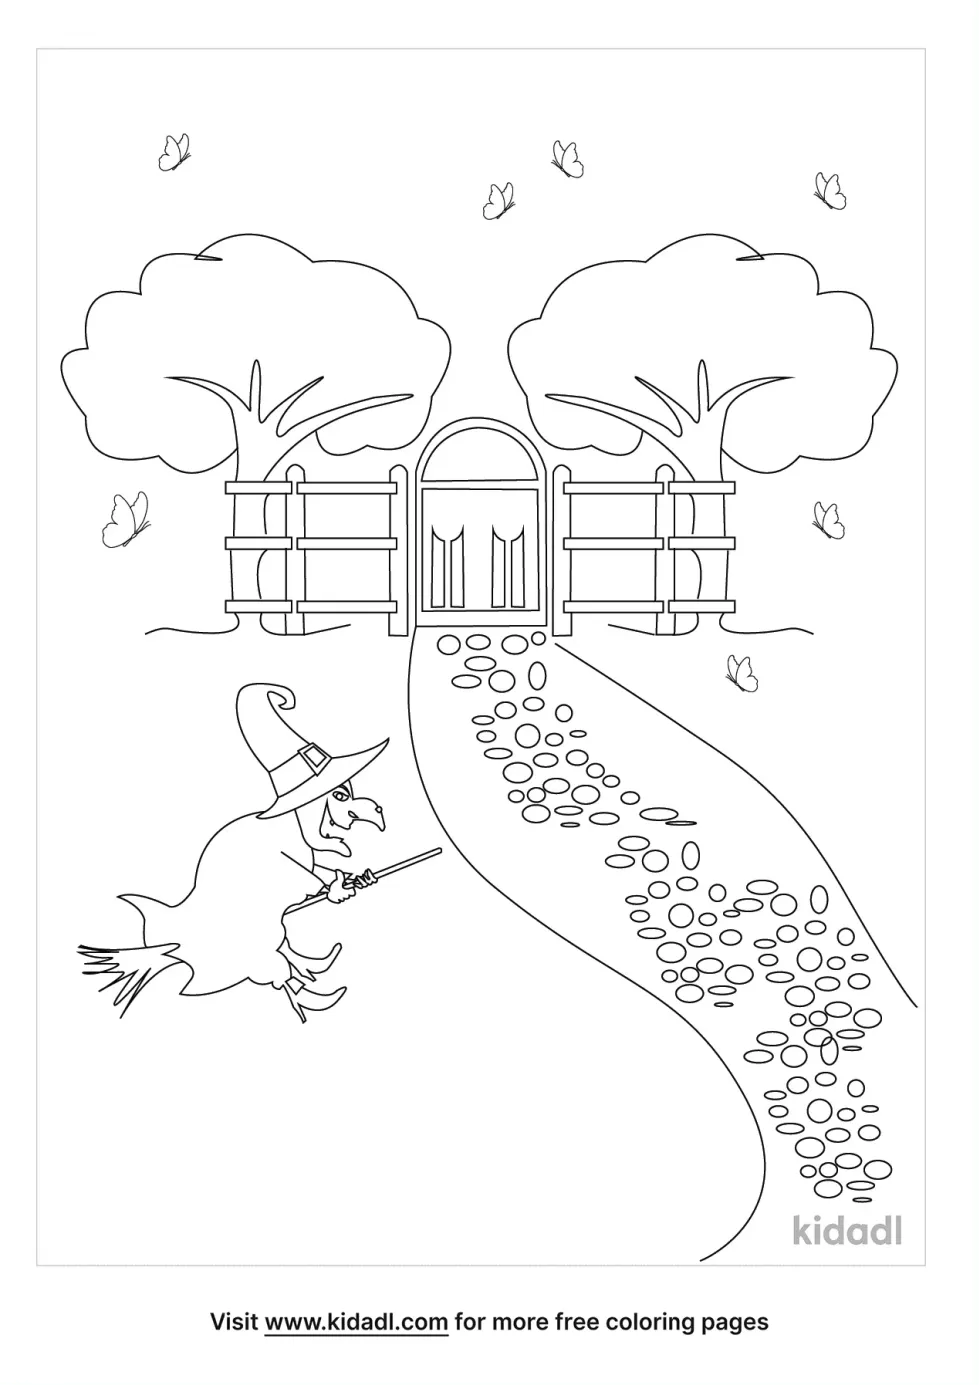 The Magic Path Coloring Page